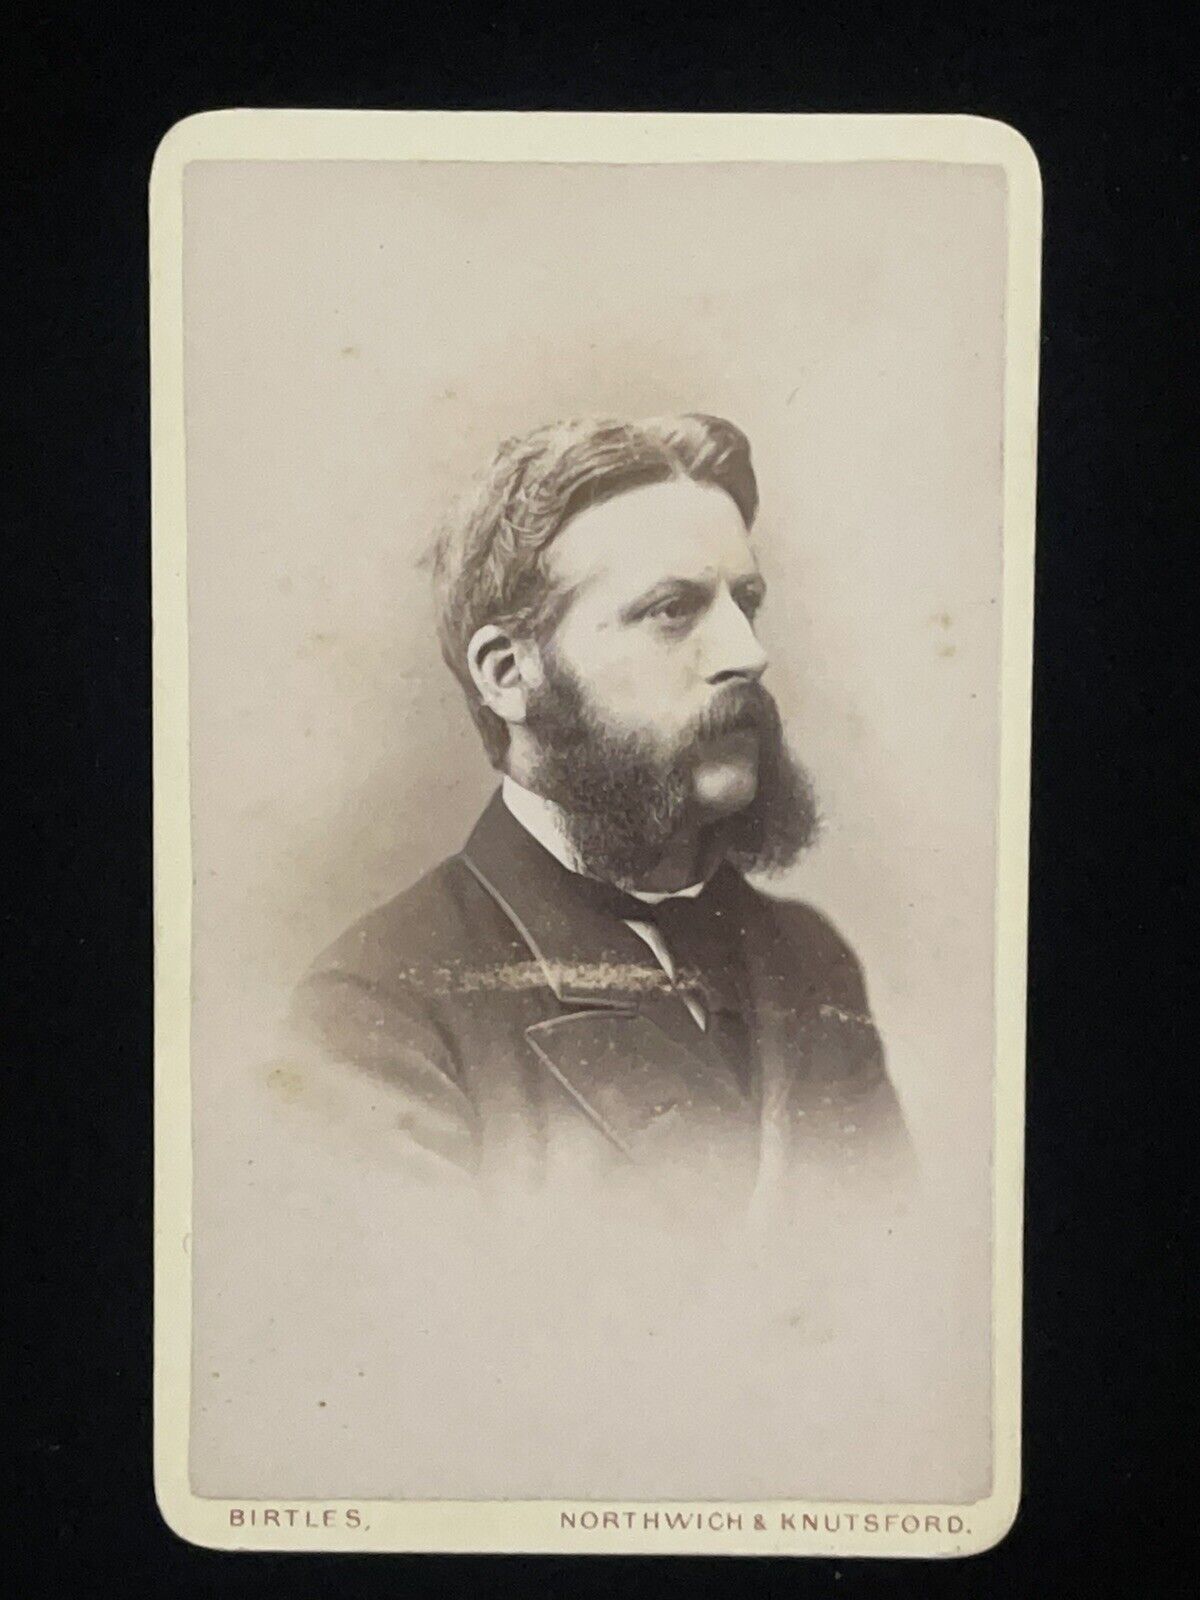 Cabinet Card Antique Photo 1800’s Man with Beard - Birtles- Paris, France